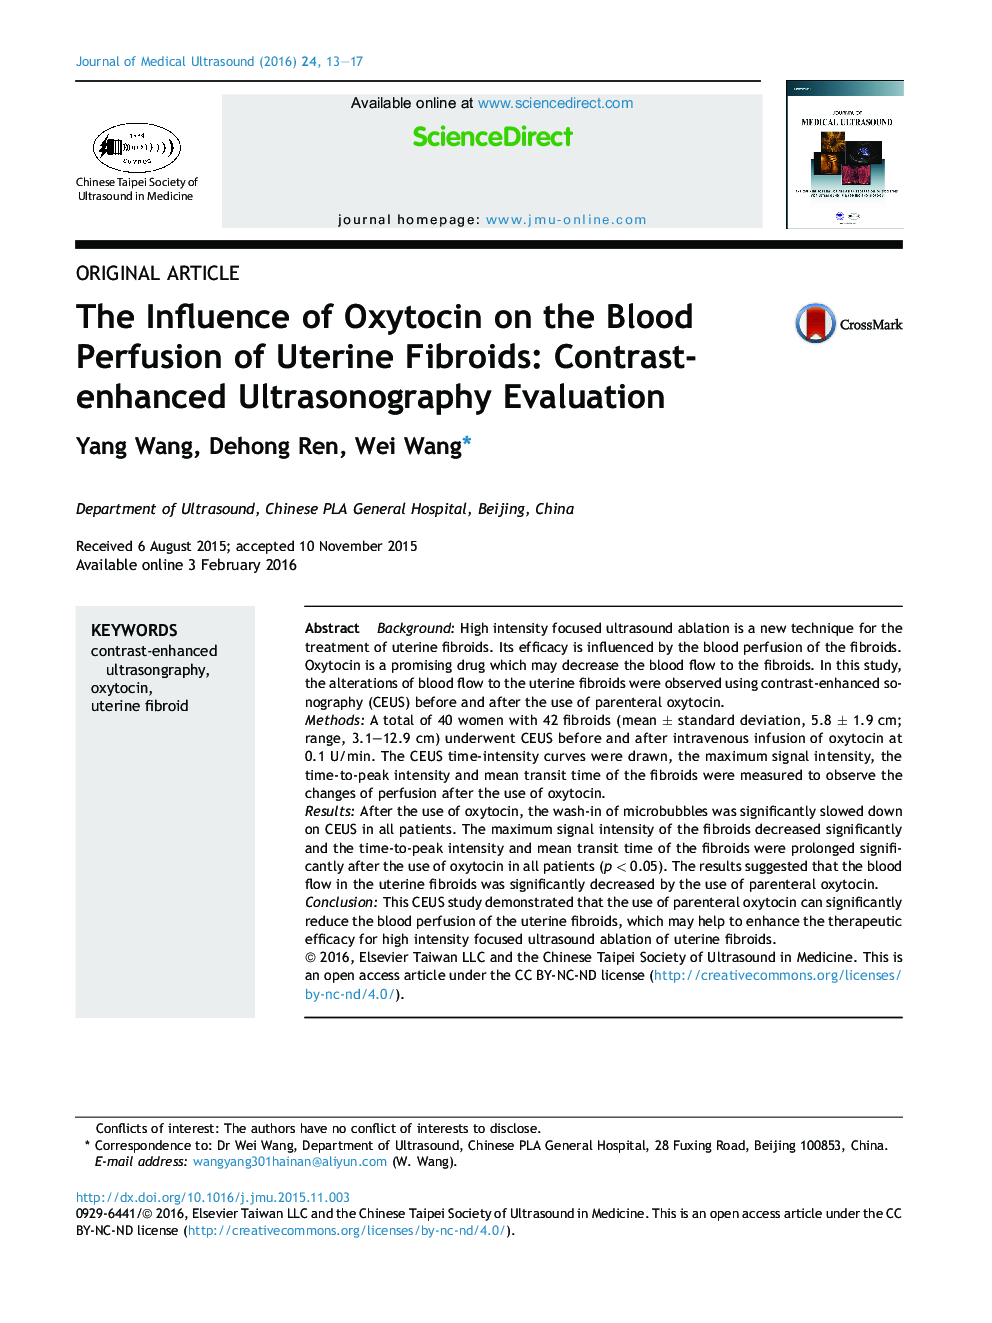 The Influence of Oxytocin on the Blood Perfusion of Uterine Fibroids: Contrast-enhanced Ultrasonography Evaluation 